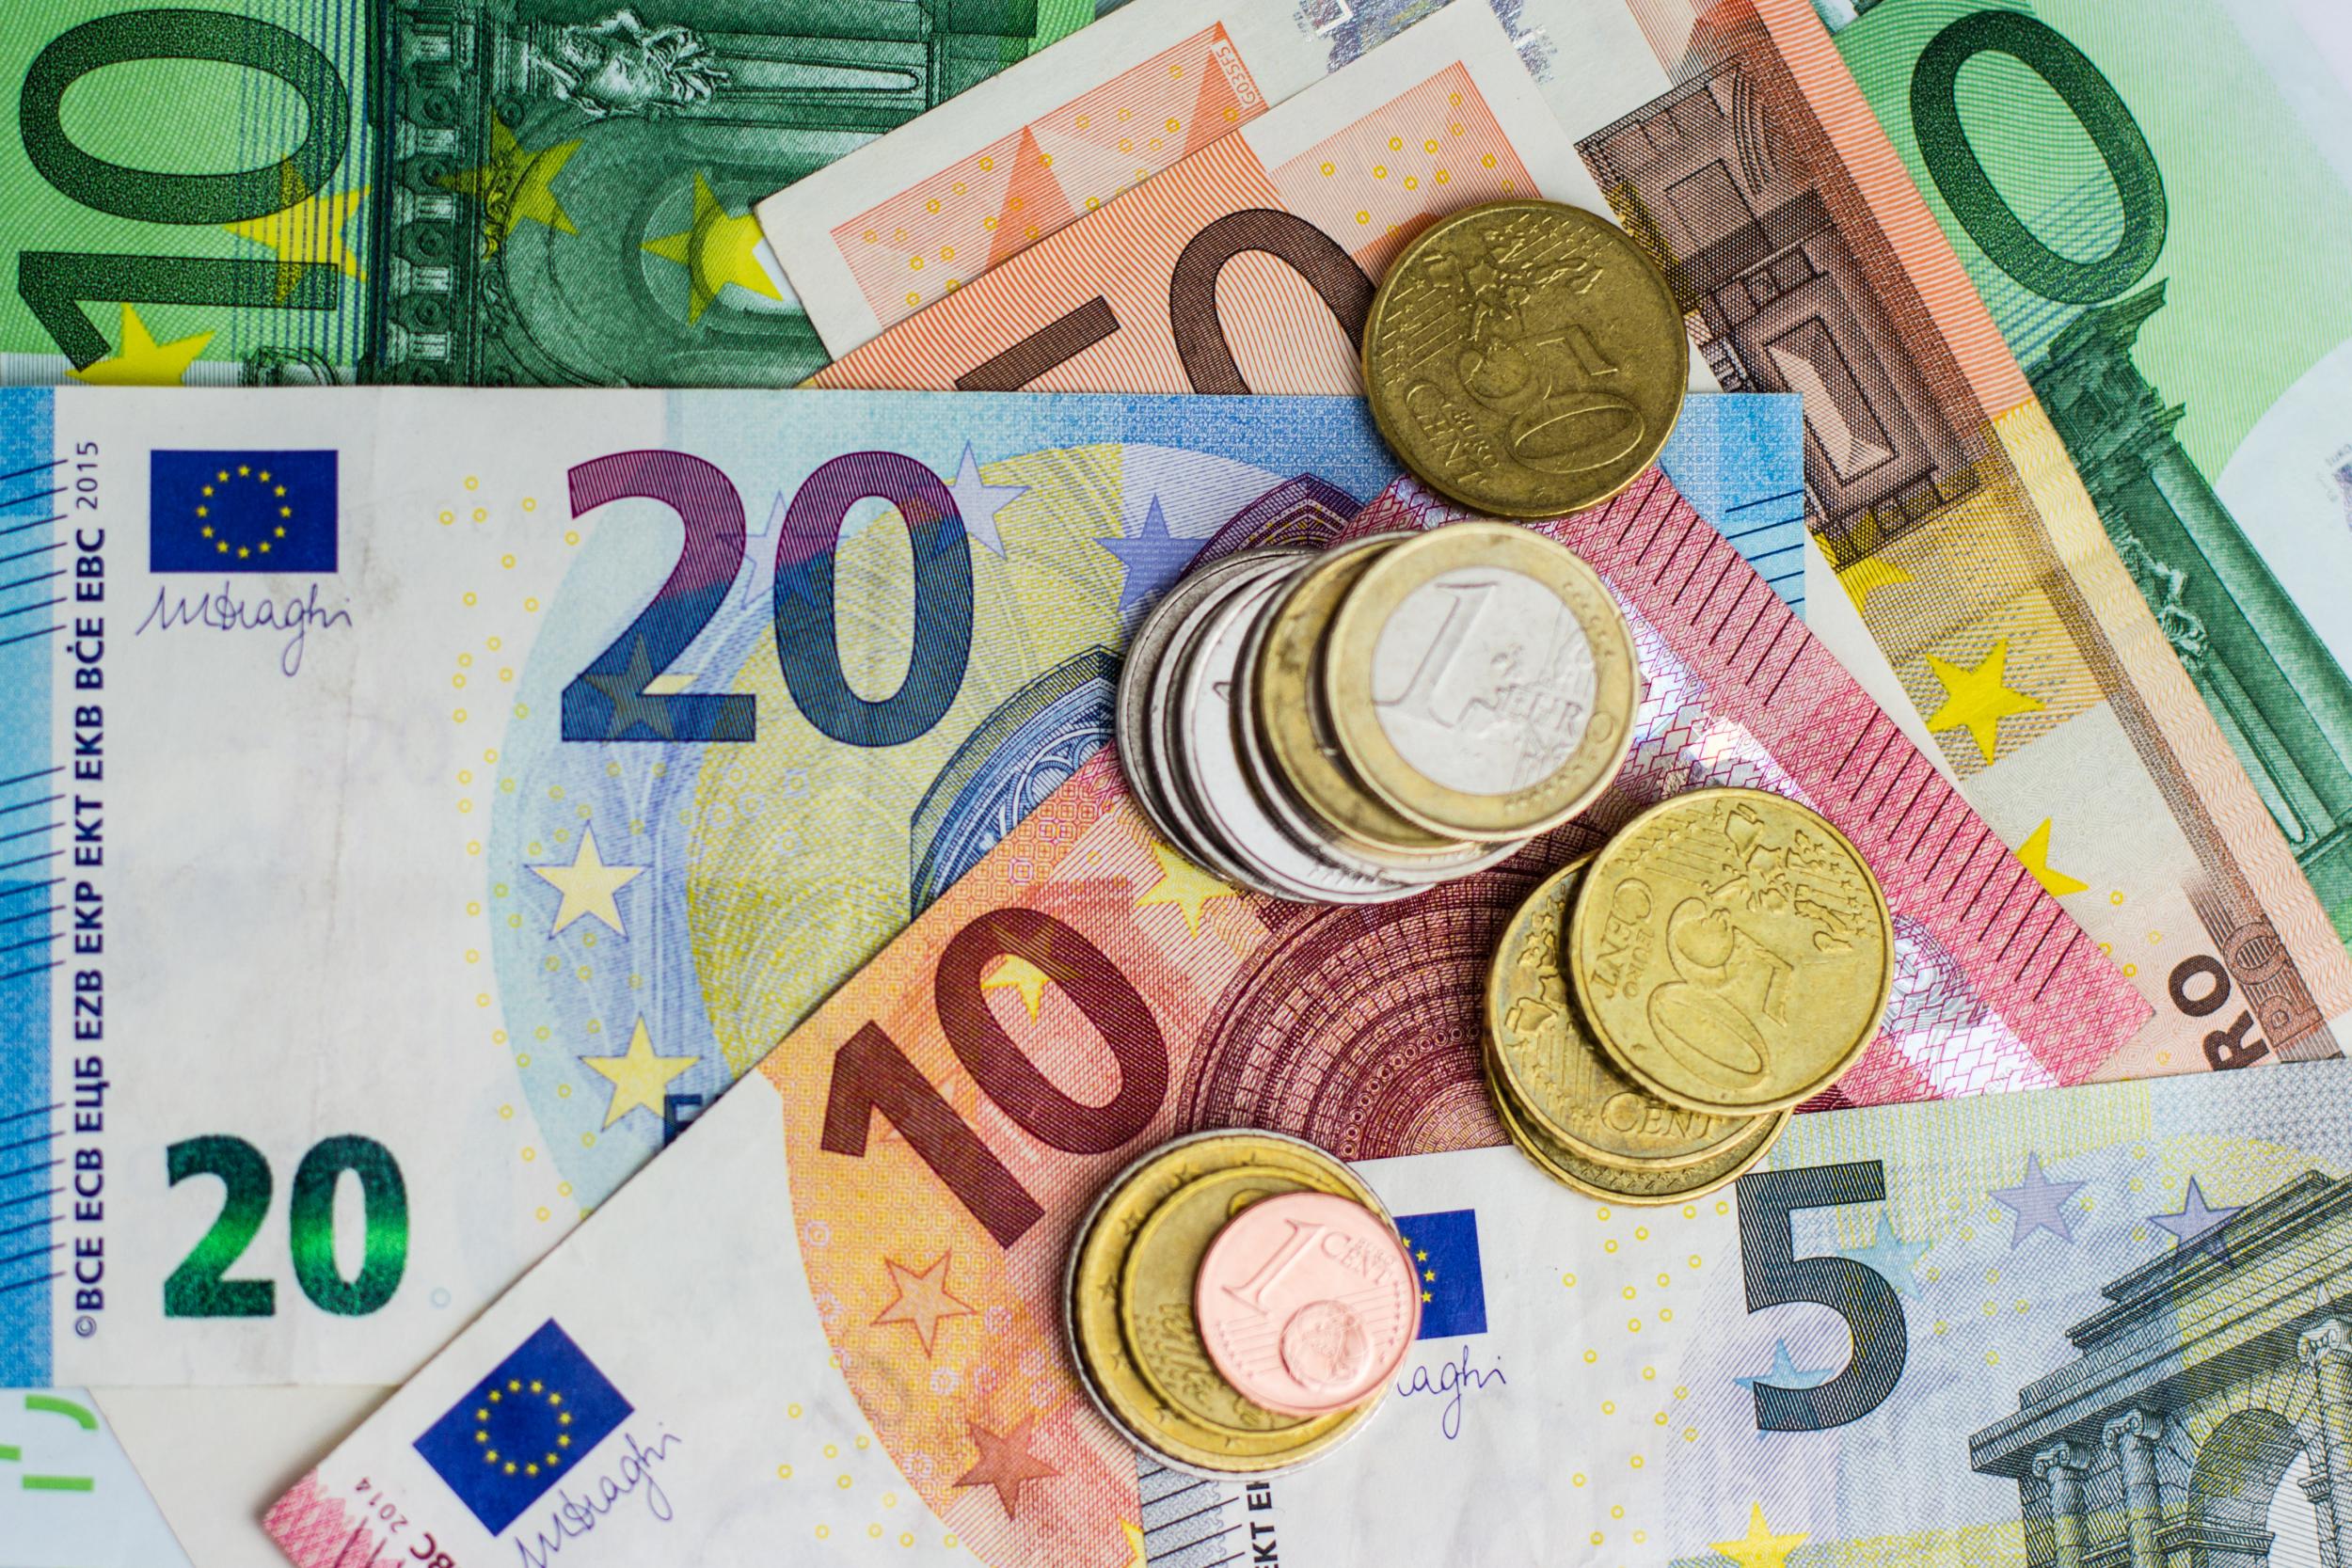 The euro hit its lowest level against Japan’s yen in around eight weeks early Monday